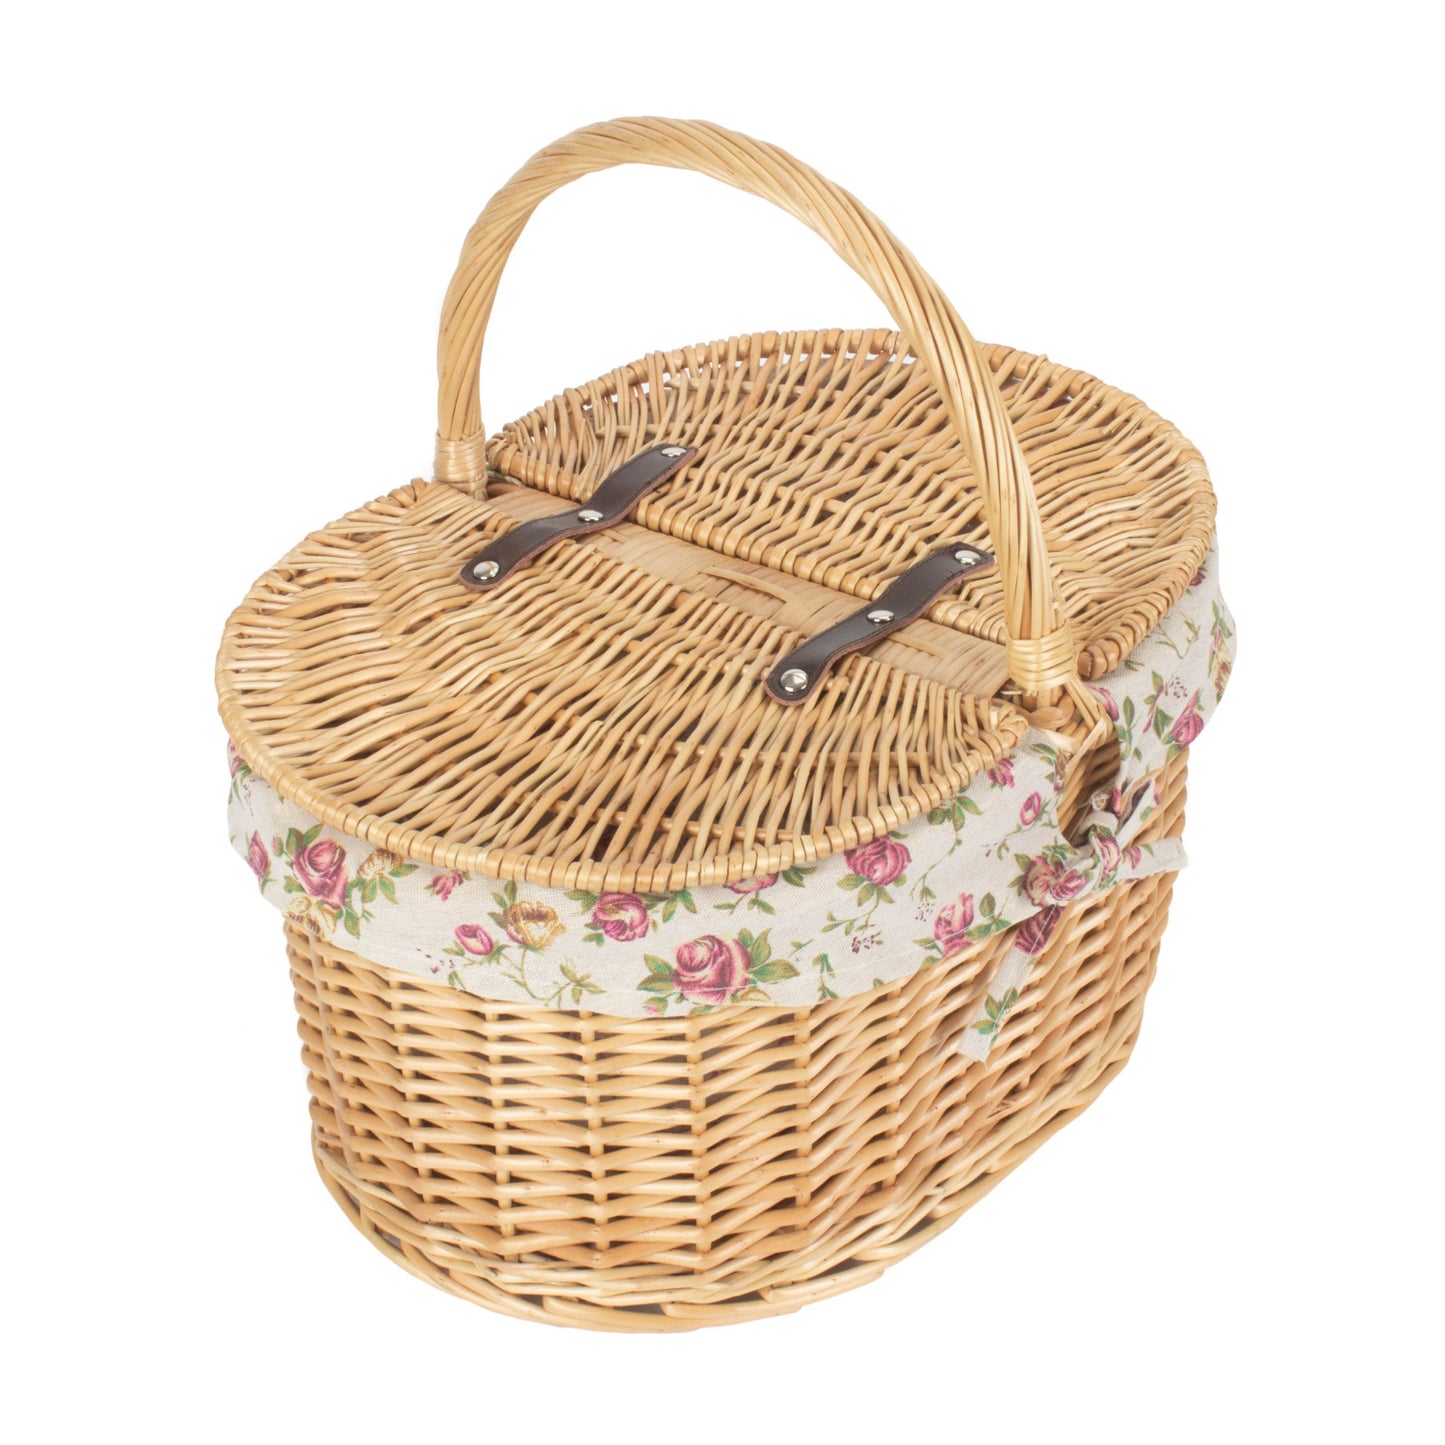 Buff Oval Picnic Basket With Garden Rose Lining